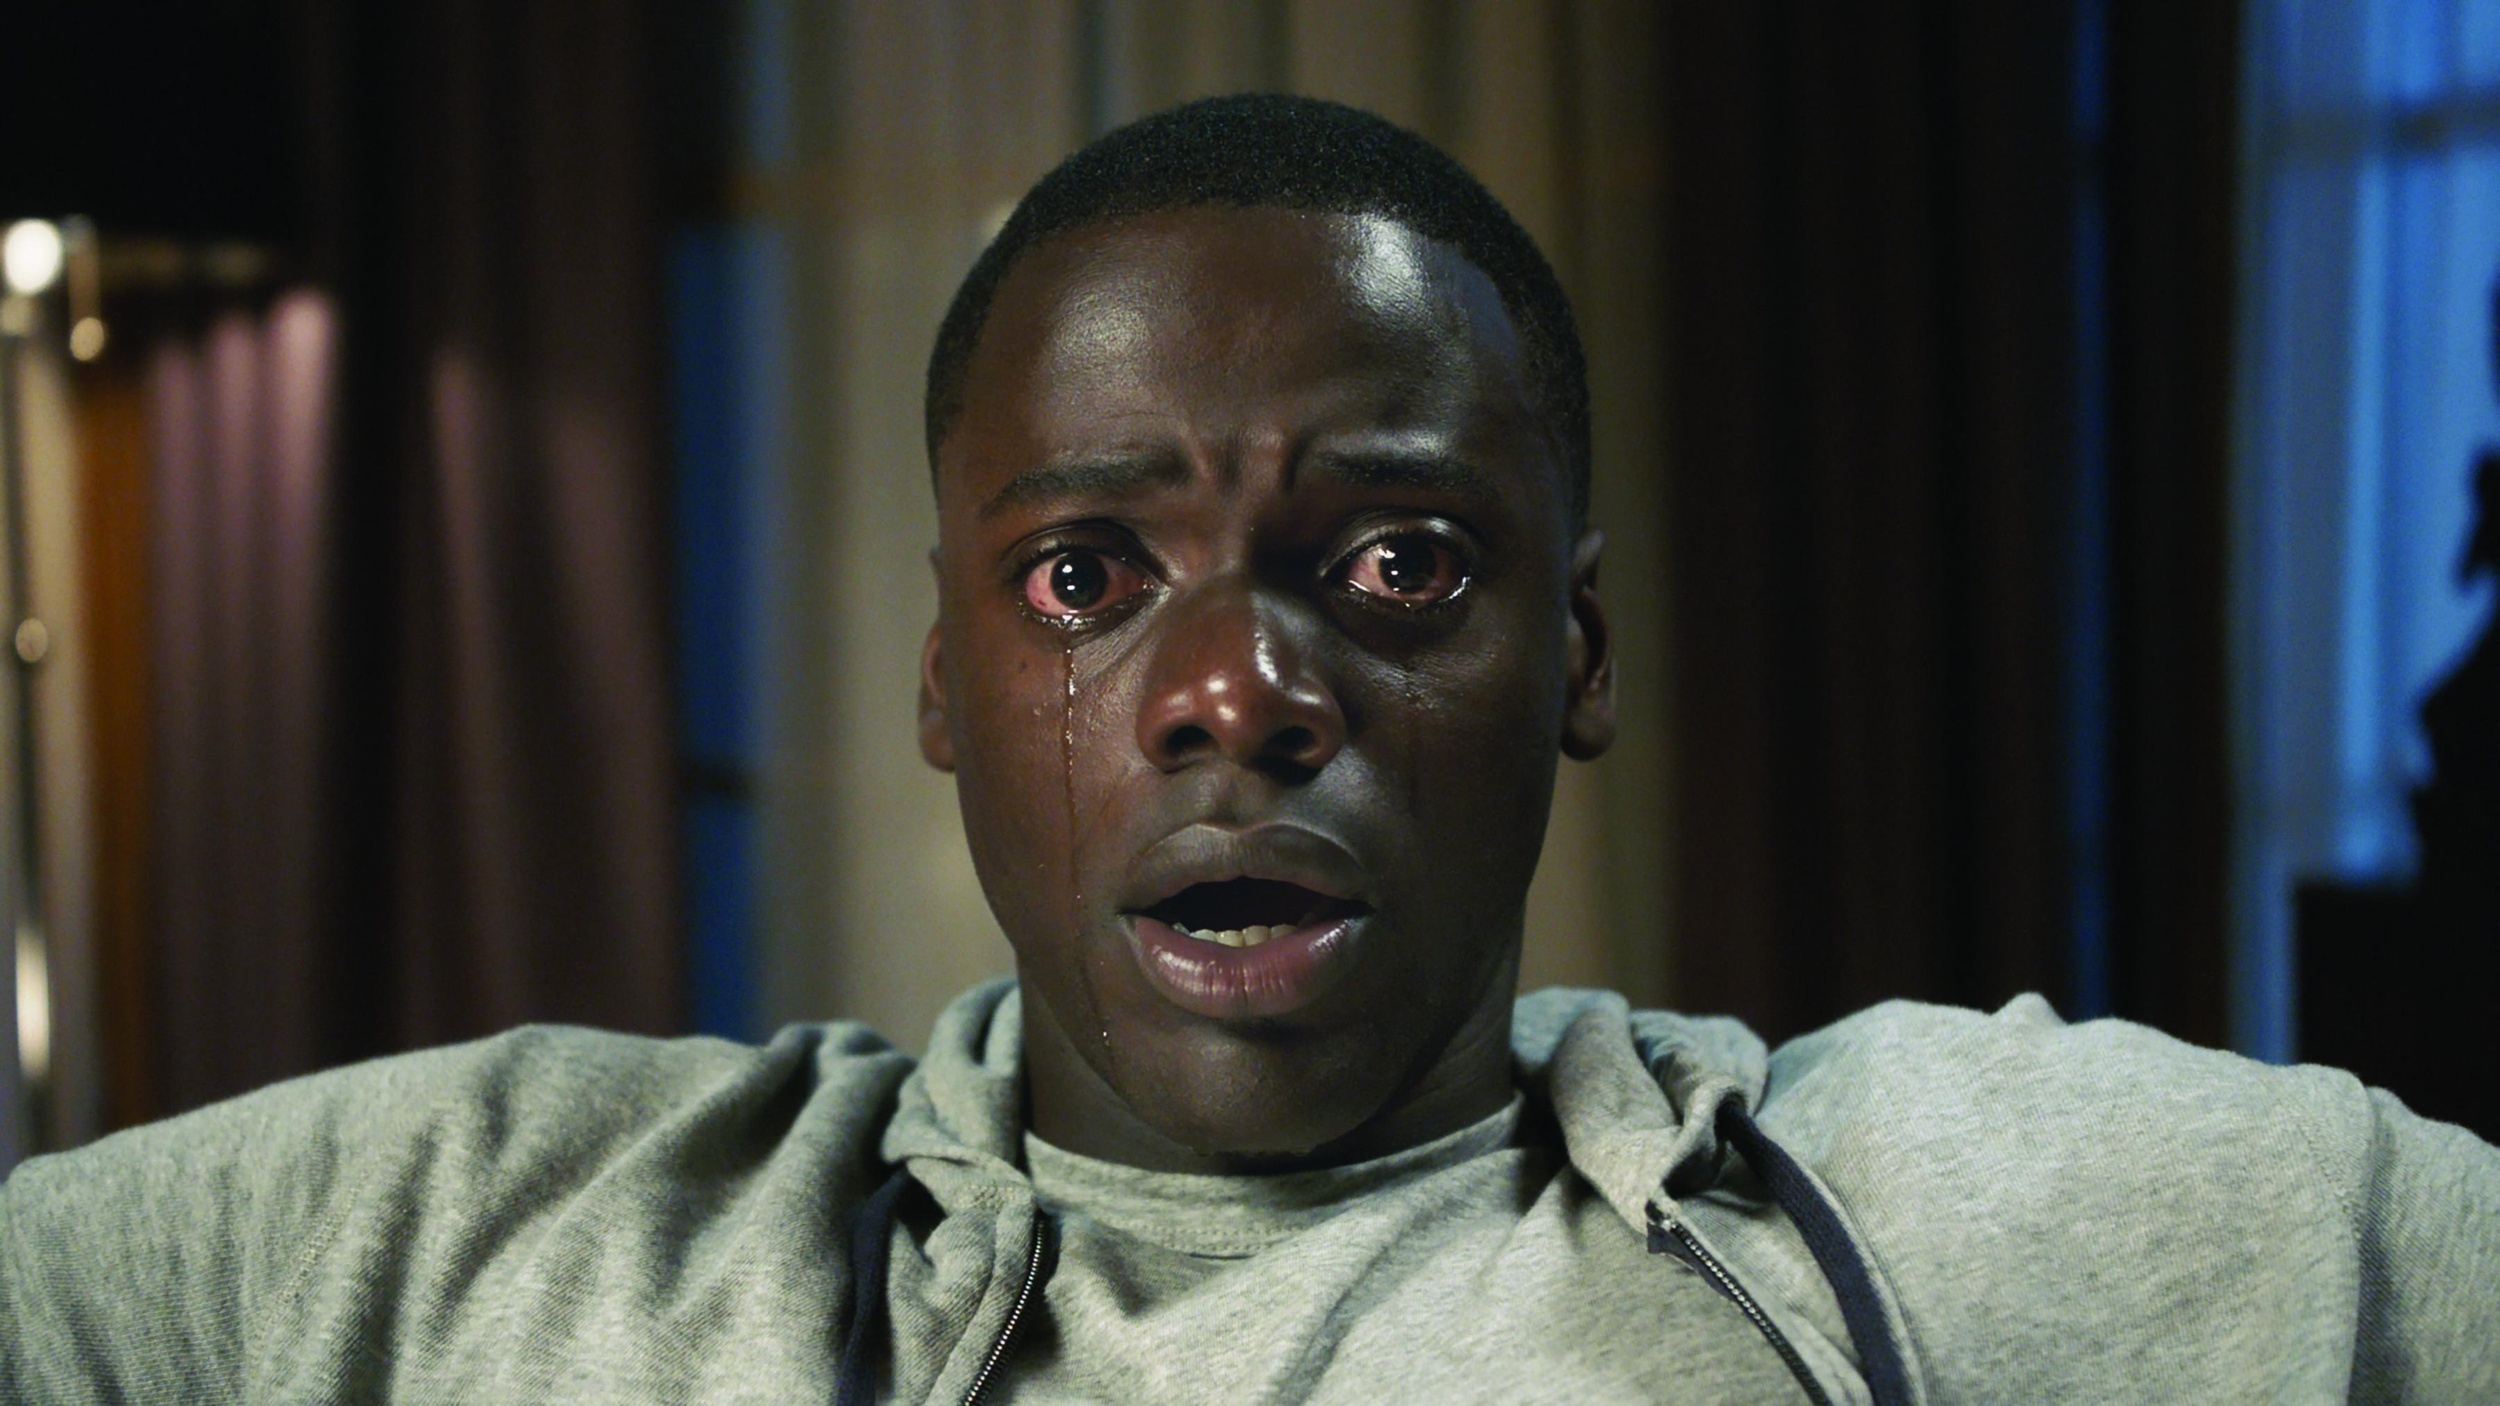 <p>Guess who's coming to dinner? A black guy who doesn't realize his white girlfriend's parents are racist. Jordan Peele's breakout is very entertaining, not least for the way it toes the line between comedy and horror. He's established himself as a director who can take a comedic sketch and twist it into a visceral fright.</p><p><a href='https://www.msn.com/en-us/community/channel/vid-cj9pqbr0vn9in2b6ddcd8sfgpfq6x6utp44fssrv6mc2gtybw0us'>Follow us on MSN to see more of our exclusive entertainment content.</a></p>